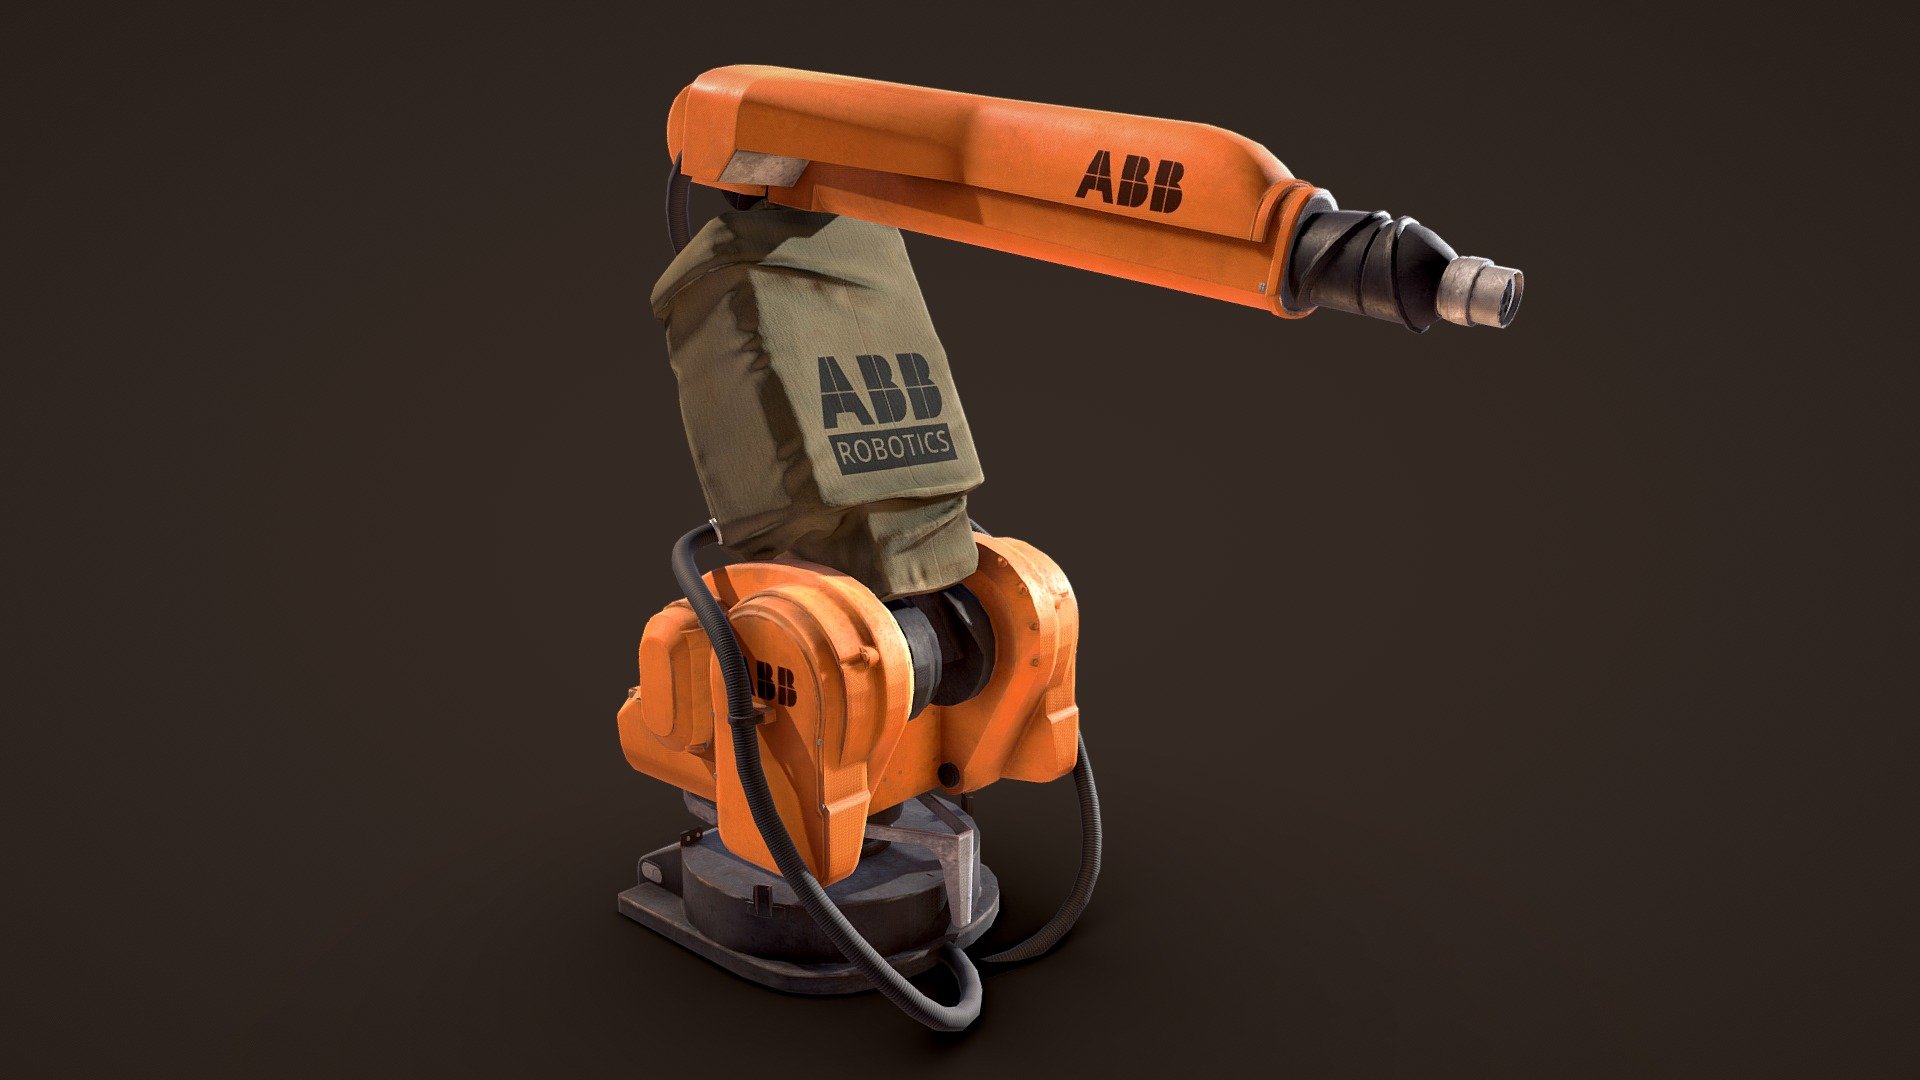 An industrial robot made for an art test using Blender &amp; Substance painter. This project was a good practice in hardsurface modeling and texturing even though I didn't pass the test. The model is loosely based on a few real industrial robots and it is game optimized.

Artstation

I do not own the ABB logo or trademark 3d model